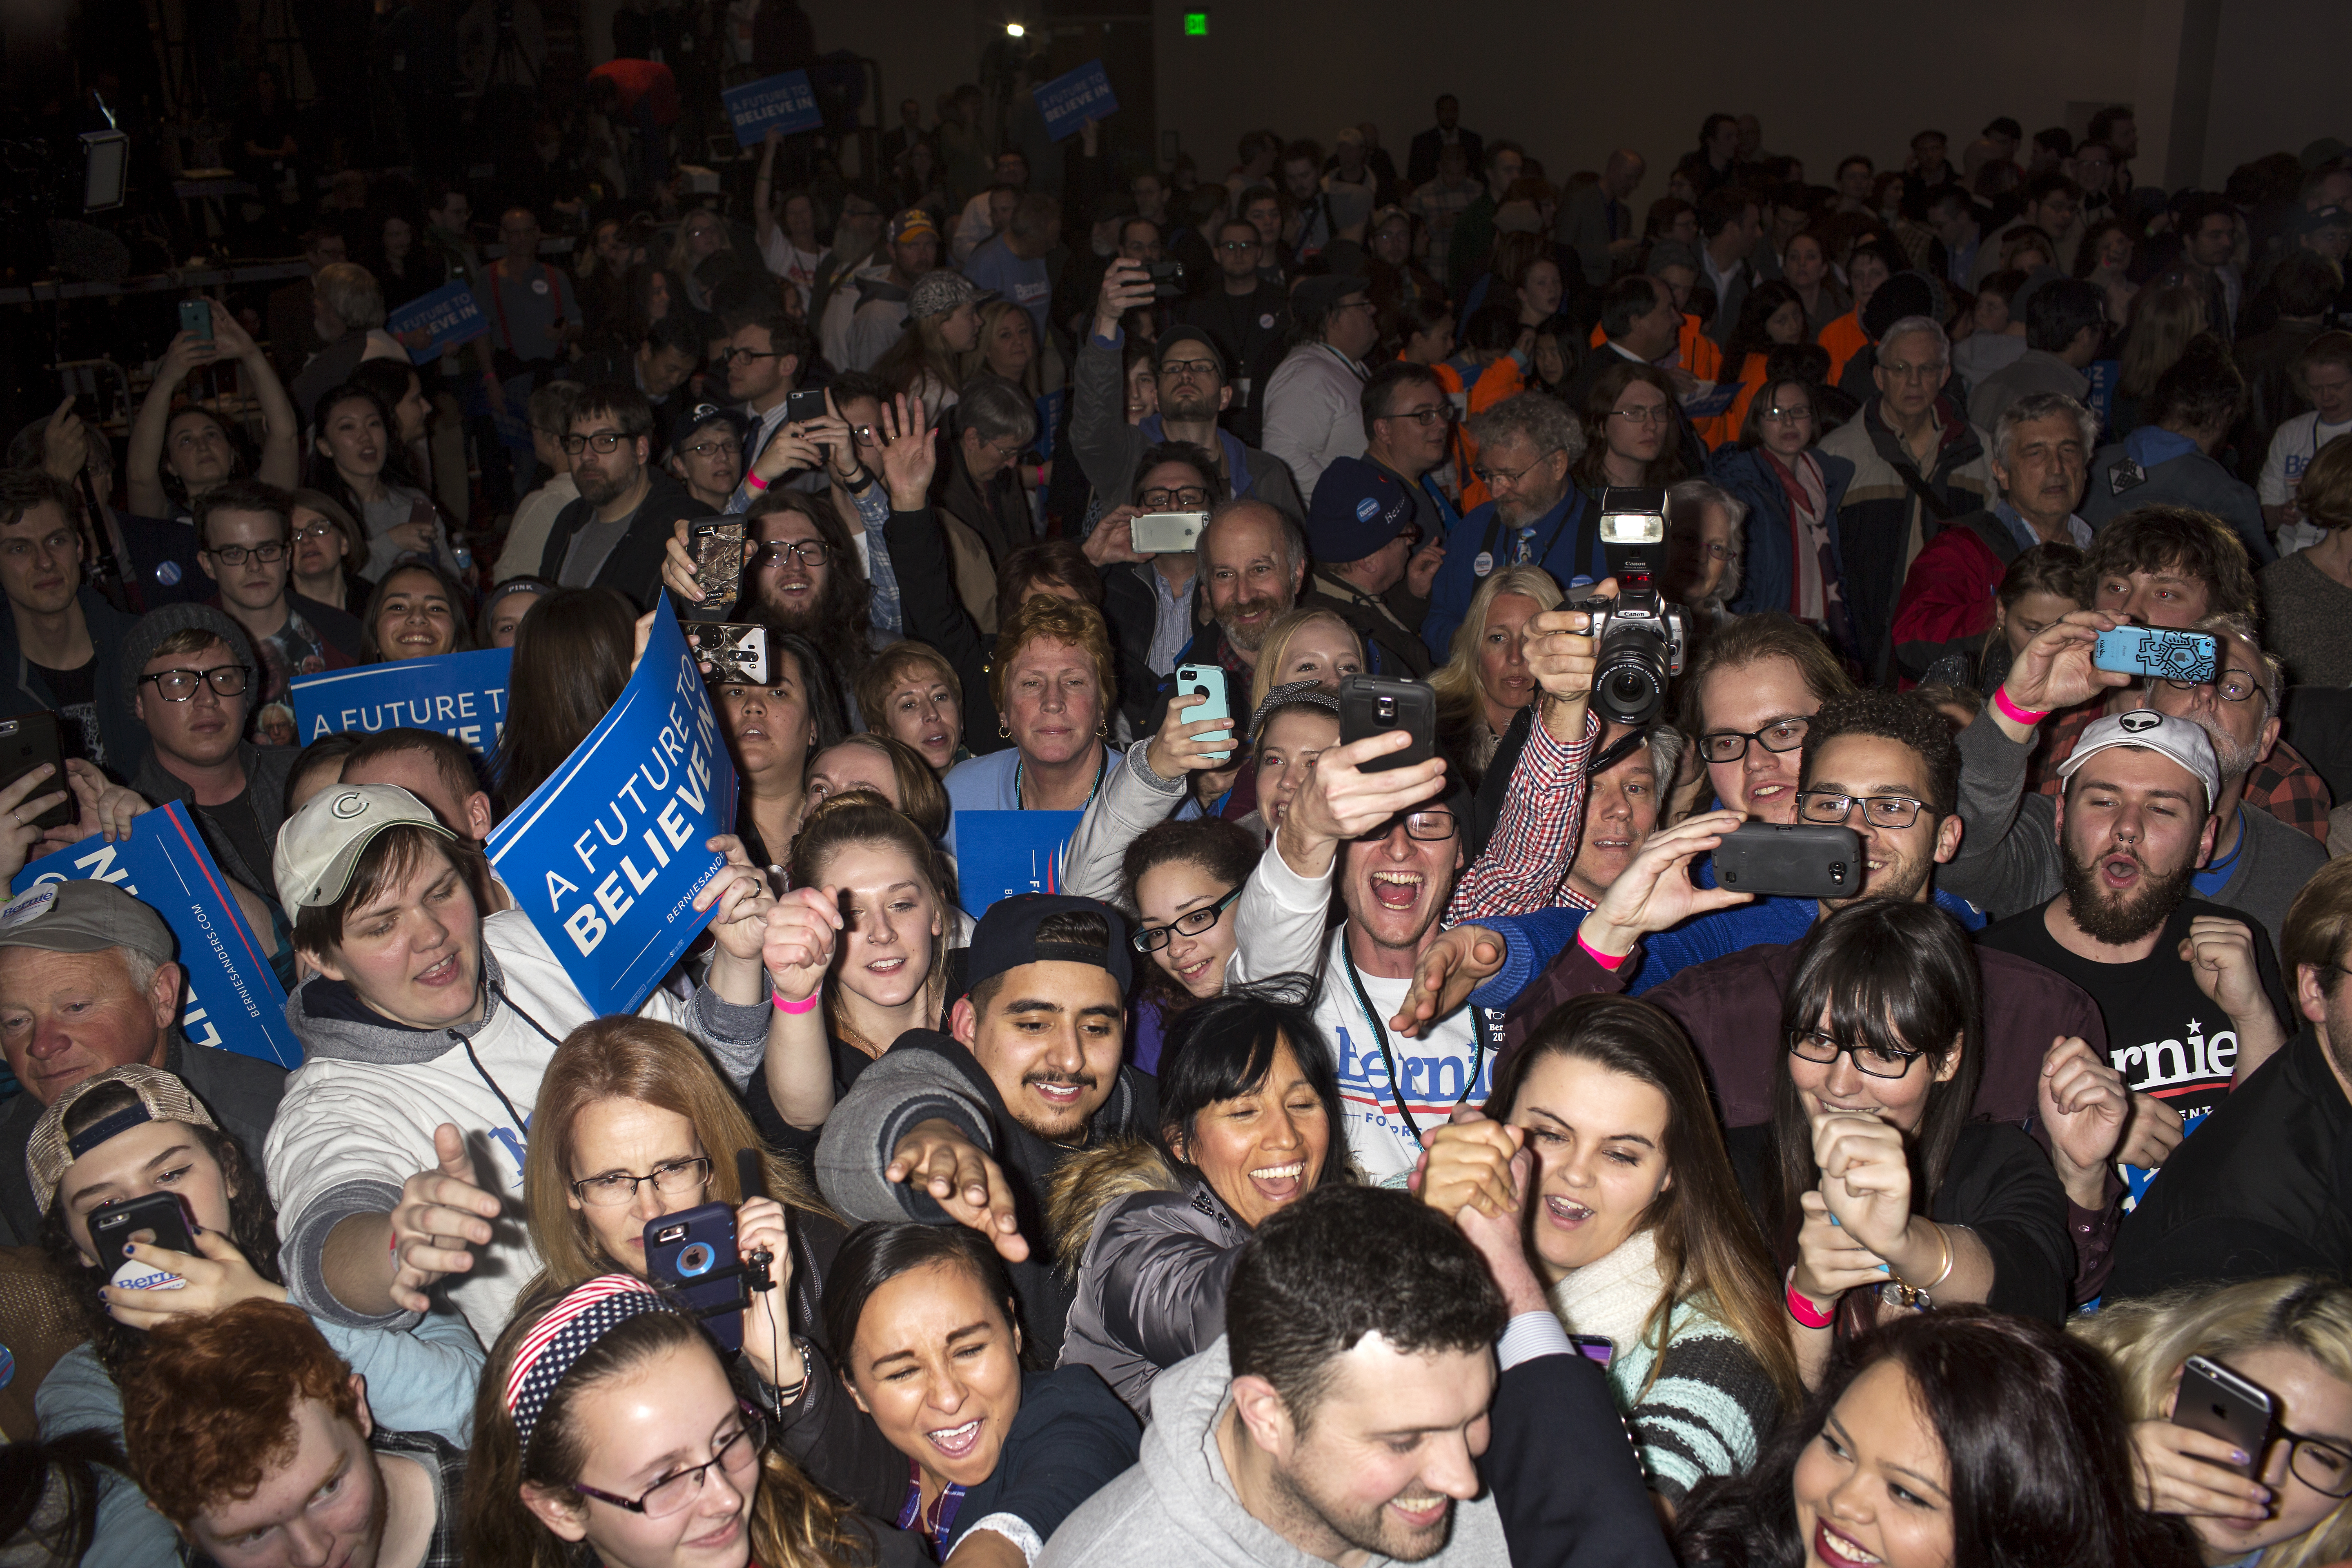 Supporters cheer for Vermont Sen. Bernie Sanders on caucus night during a rally in Des Moines, Iowa on Feb. 1, 2016.